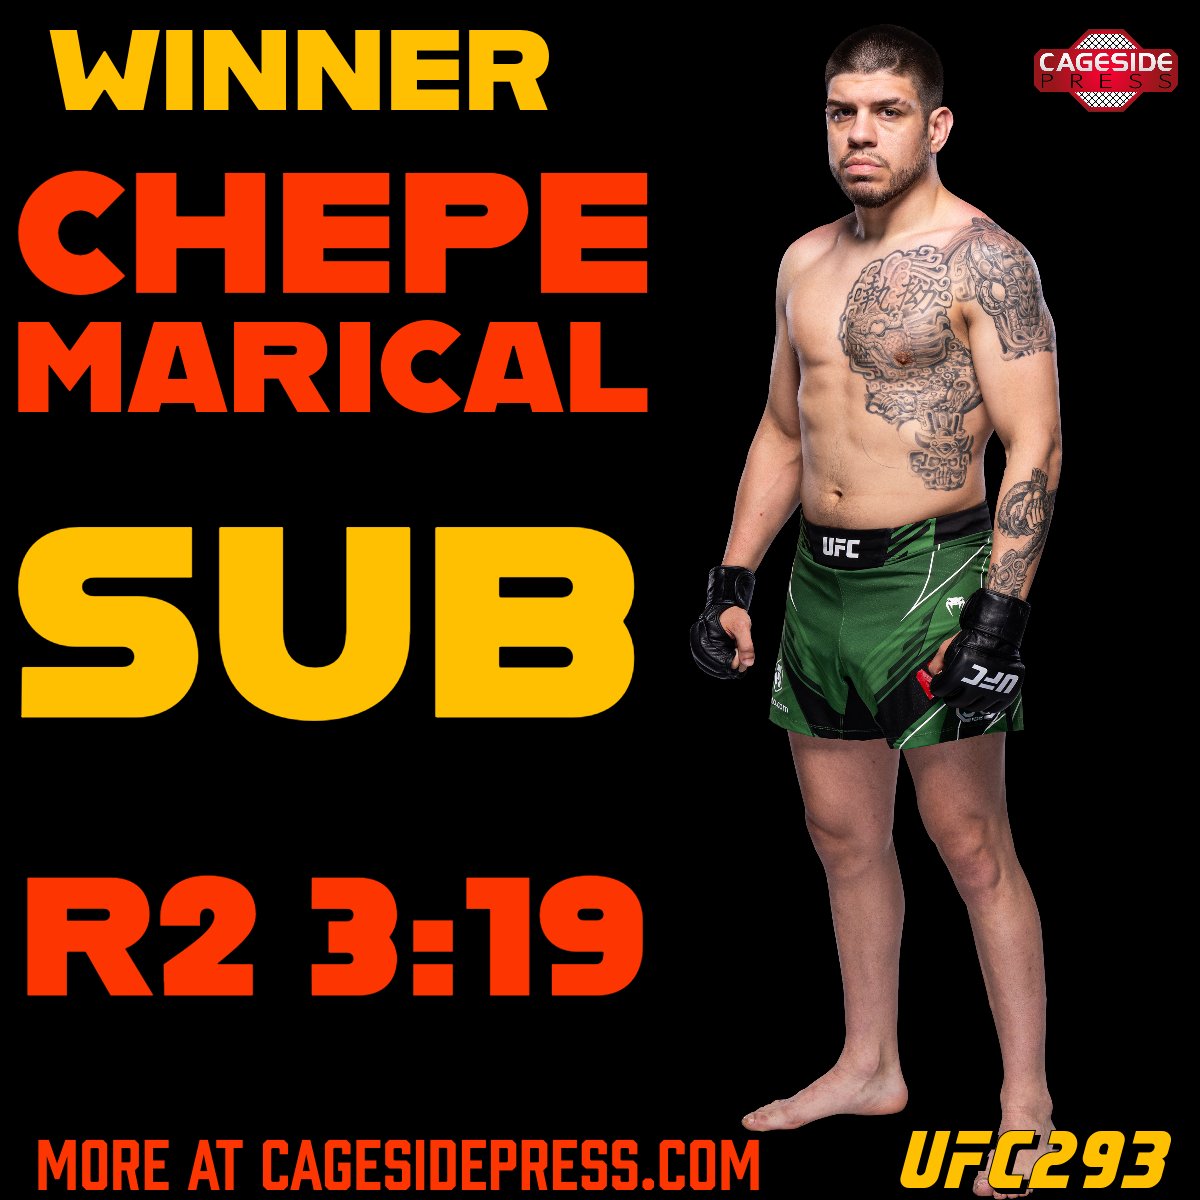 Chepe Mariscal def. Jack Jenkins via R2 Submission (Verbal Tap) 3:19 #UFC293 

Story coming to CagesidePress.com

#UFC #MMA #Sydney #ChepeMariscal